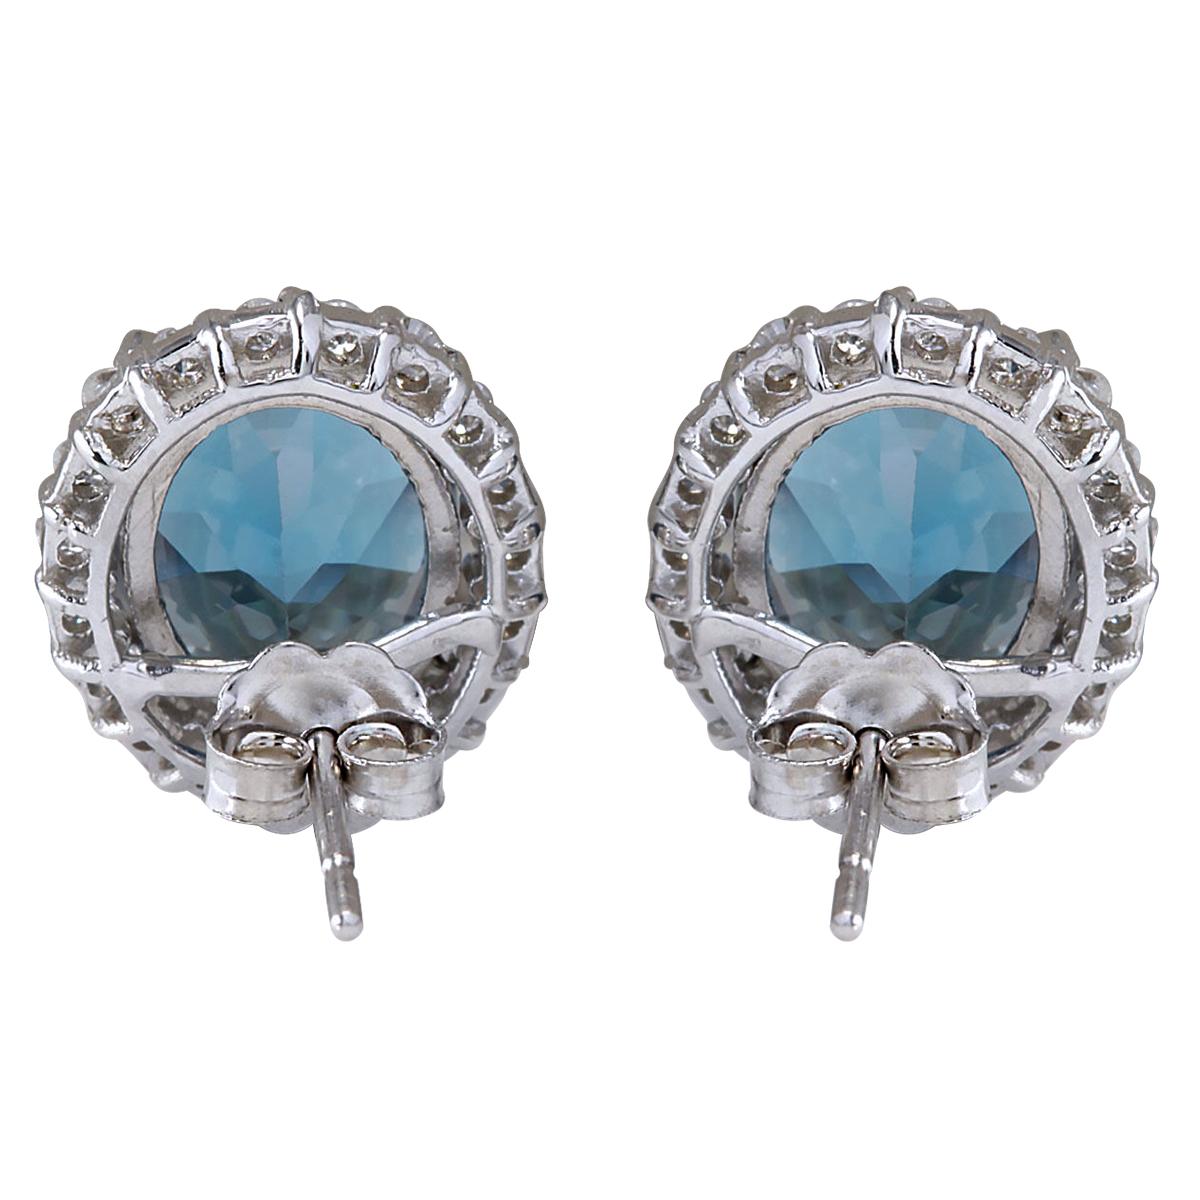 Introducing our exquisite 8.70 Carat Natural Topaz Earrings, crafted in luxurious 14K White Gold. Each earring bears the authentic 14K stamp and weighs a total of 3.5 grams, offering both elegance and comfort. The mesmerizing topaz gemstones,